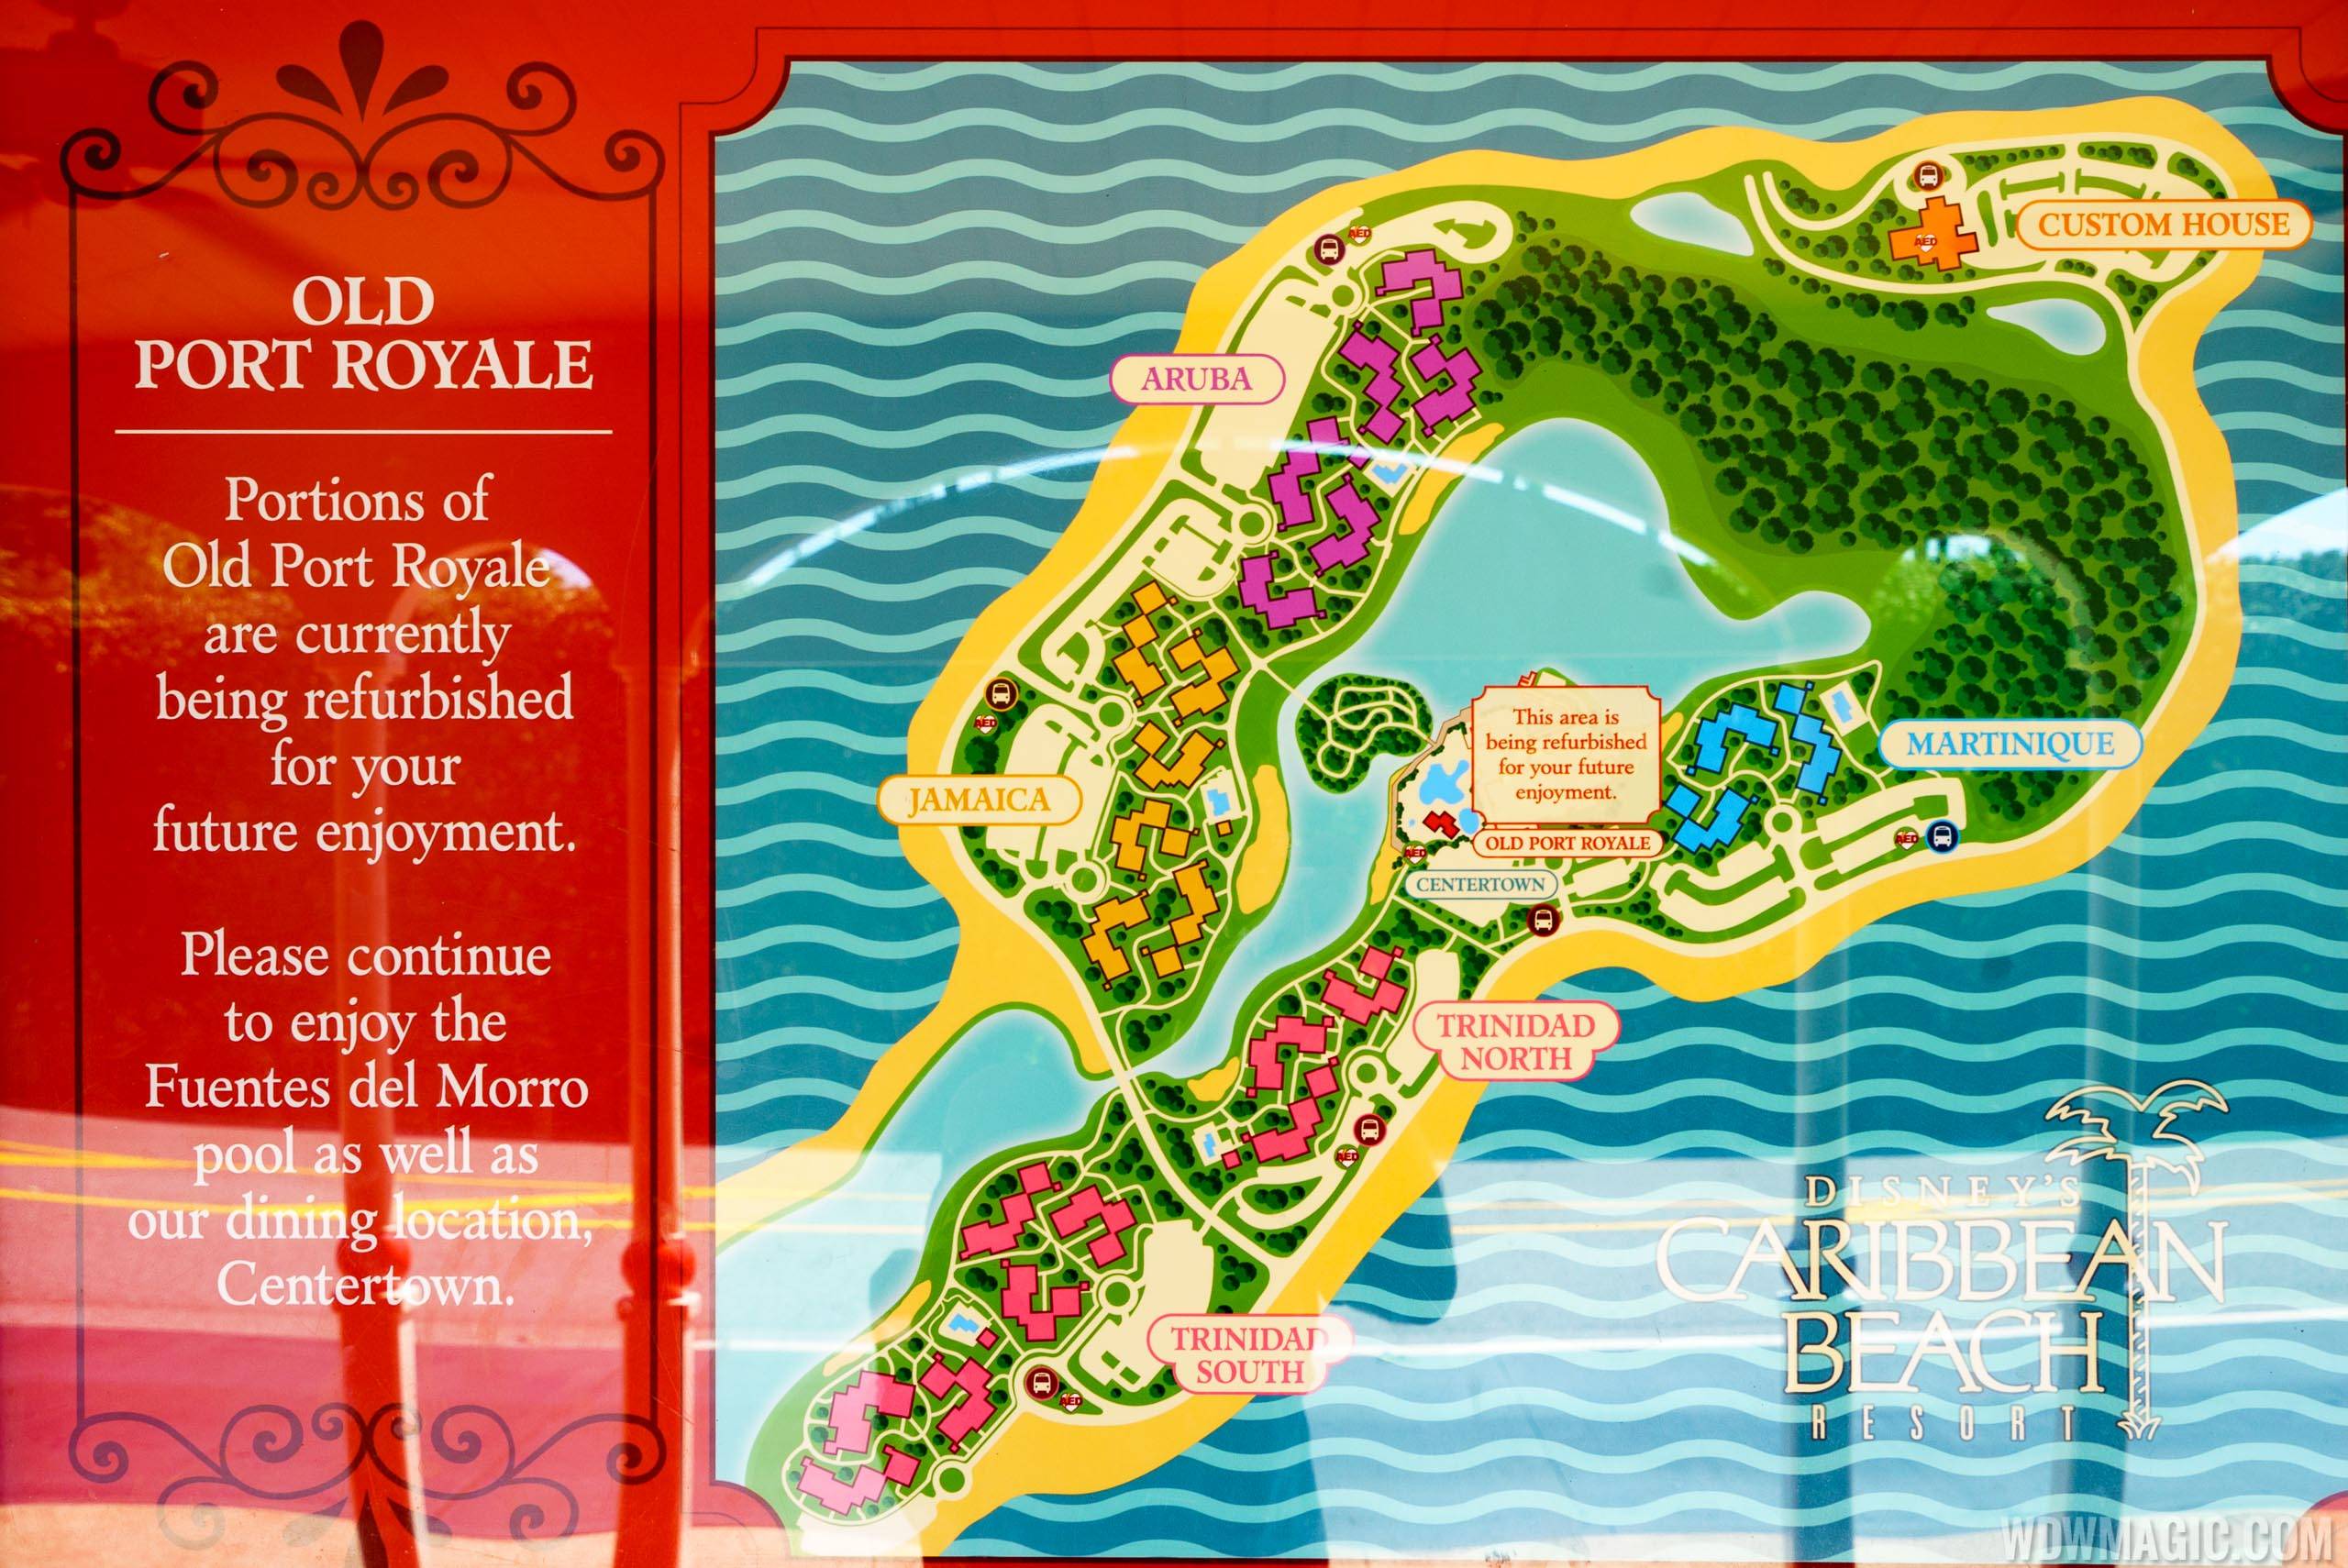 New resort map showing Barbados and most of Martinique removed